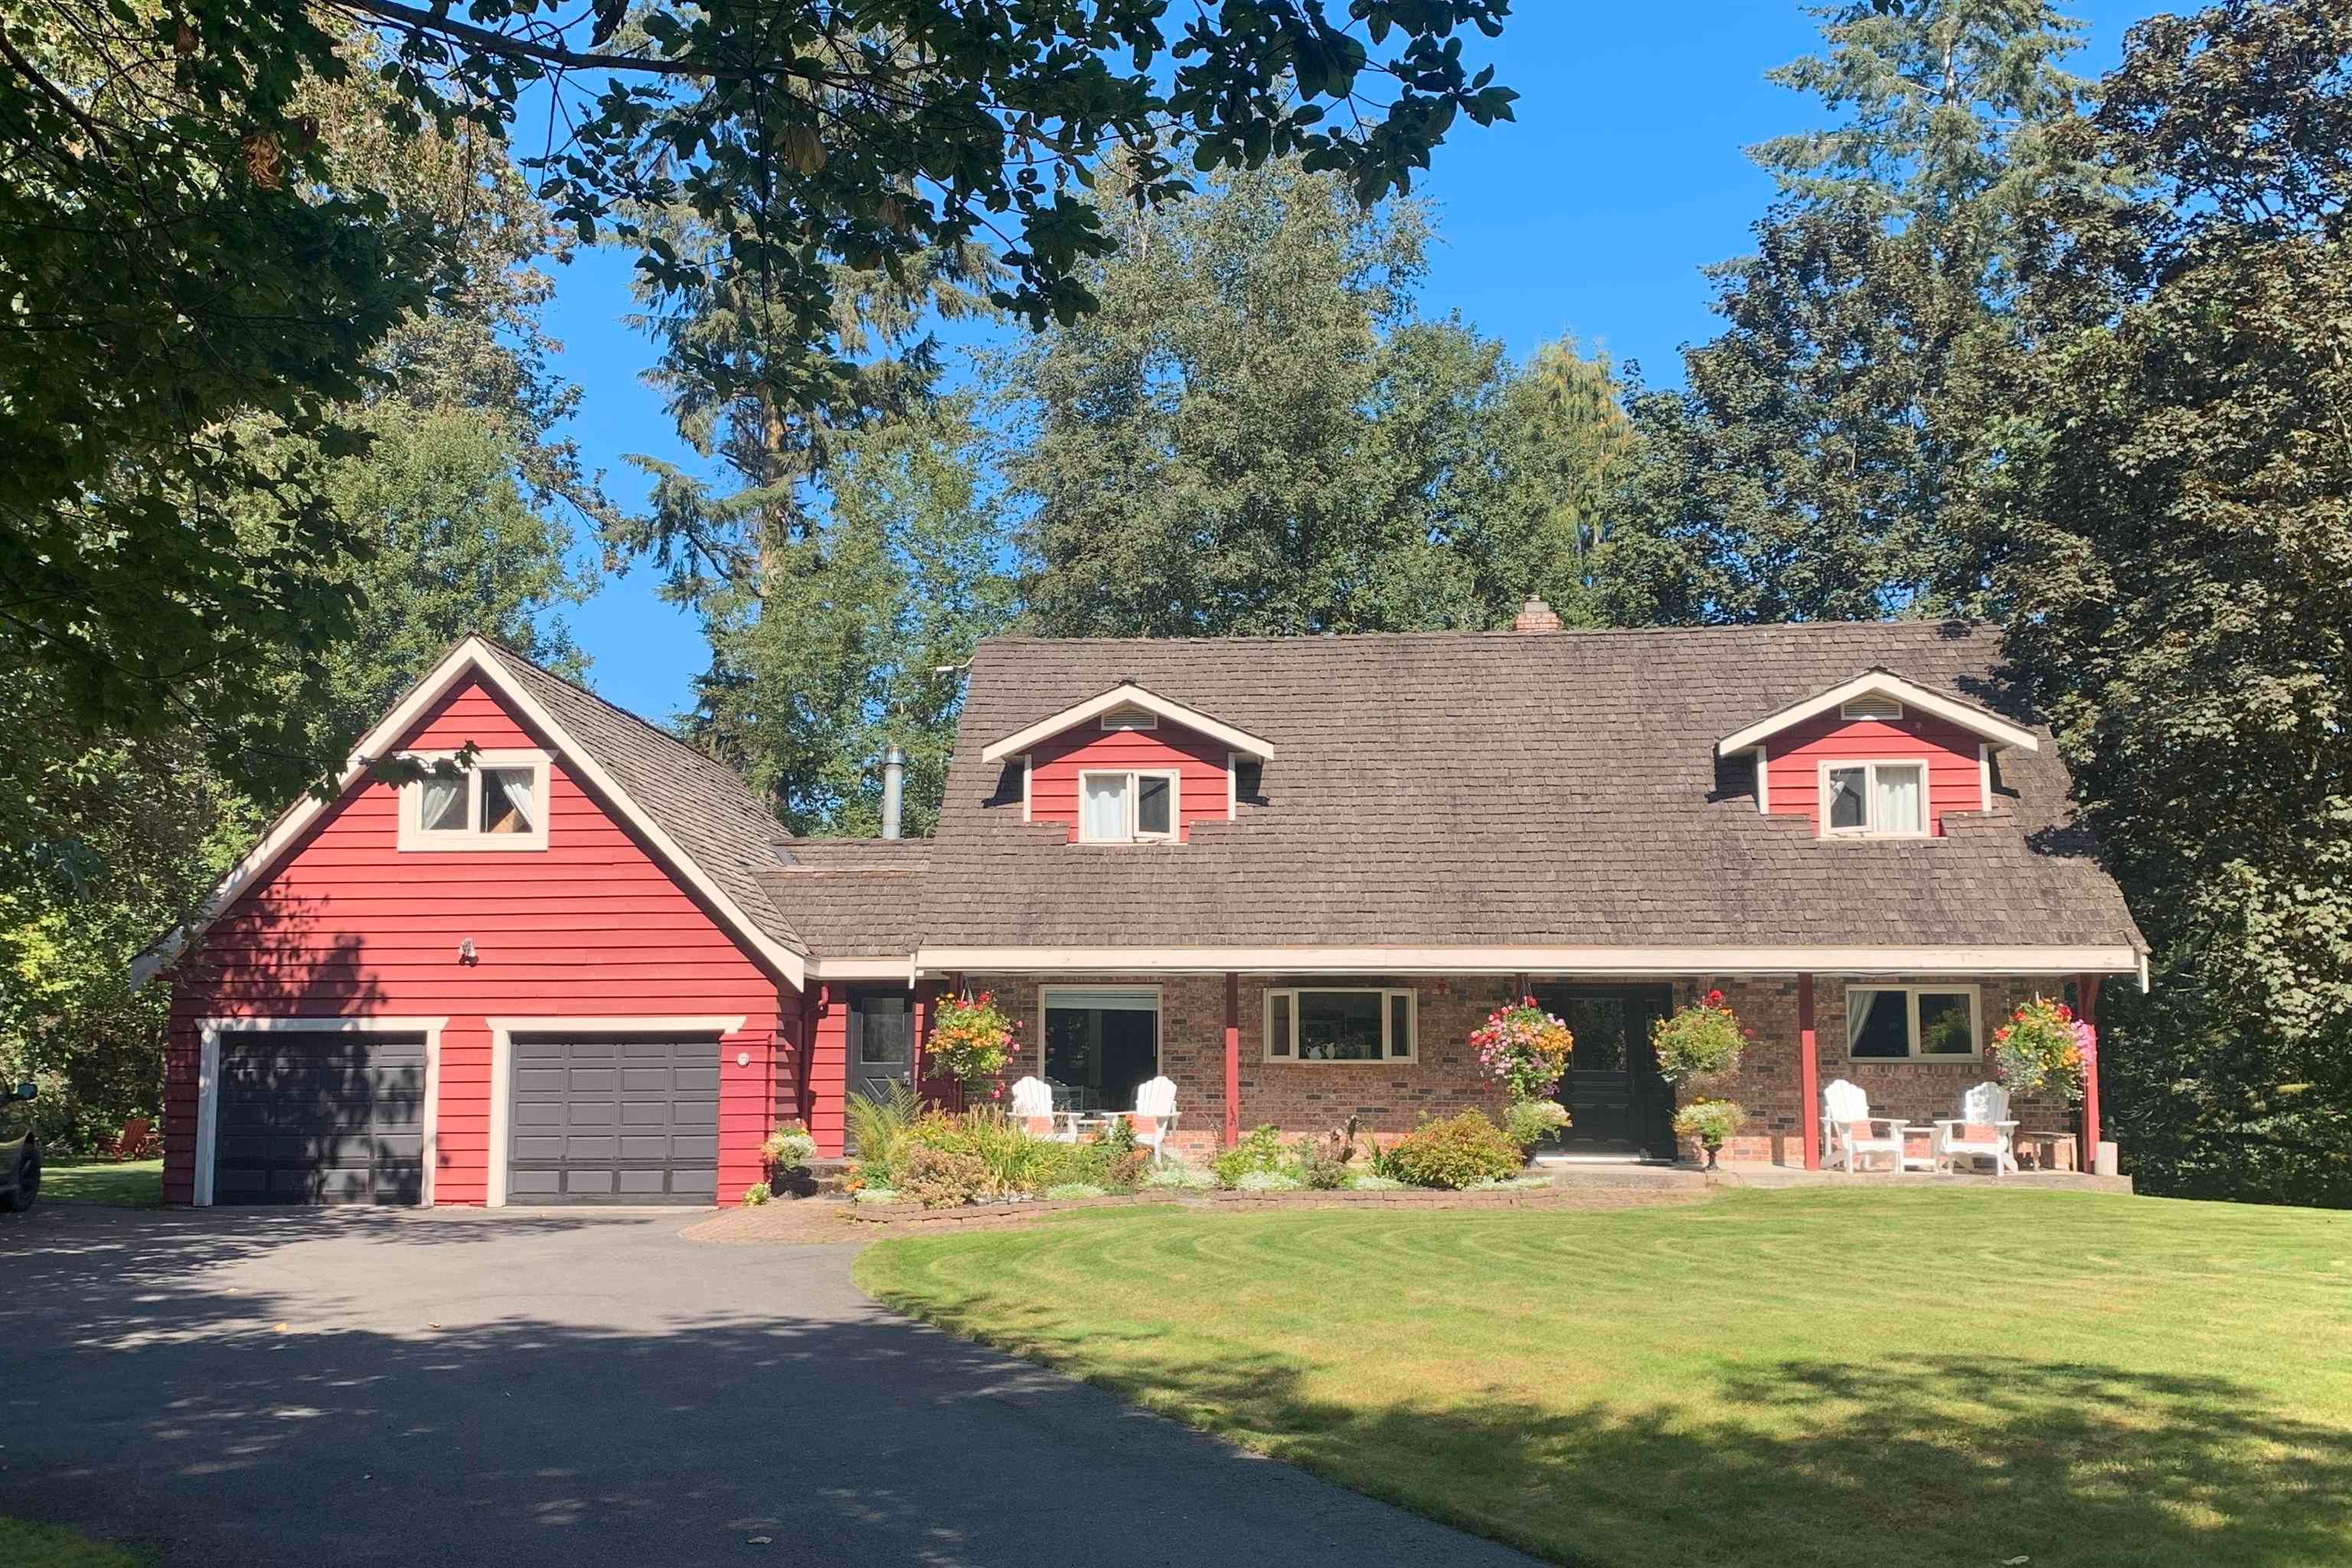 New property listed in County Line Glen Valley, Langley